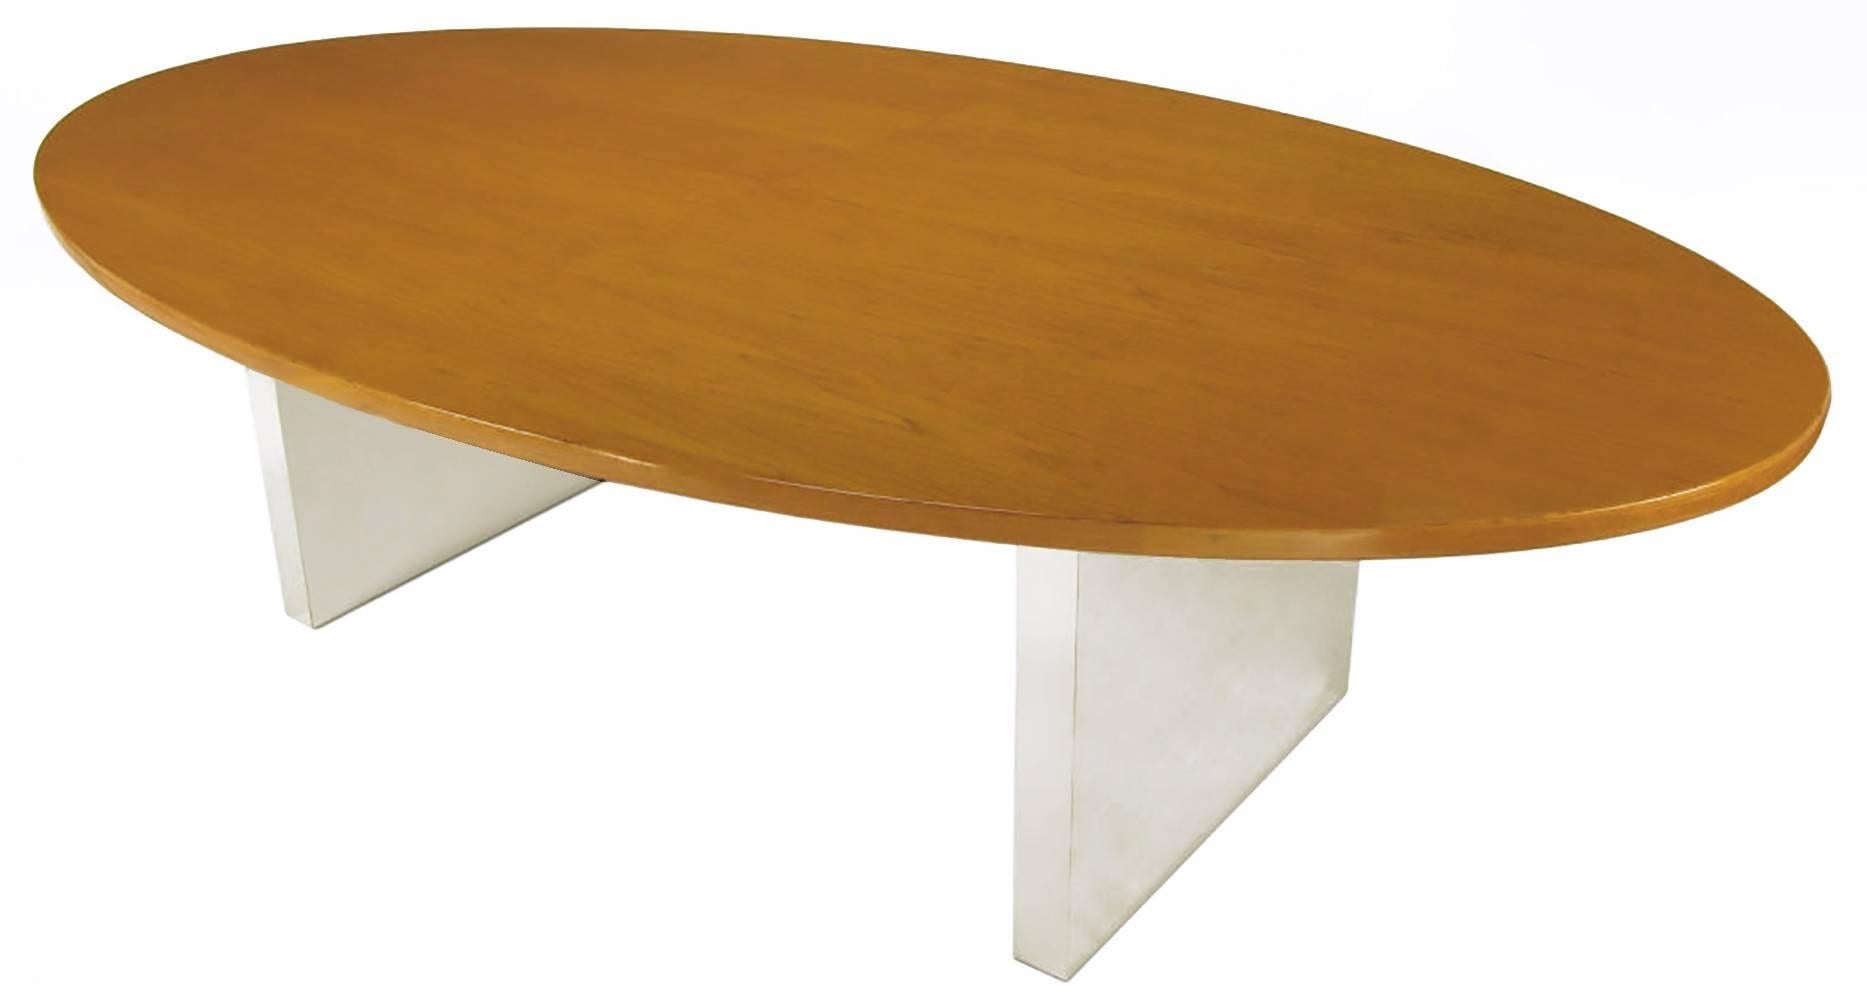 Most likely a Roger Sprunger derivation of an Edward Wormley design, Dunbar oval ash wood one piece top dining table. Pair of polished steel over wood panel pedestal legs. Would also make a wonderful executive desk. 52